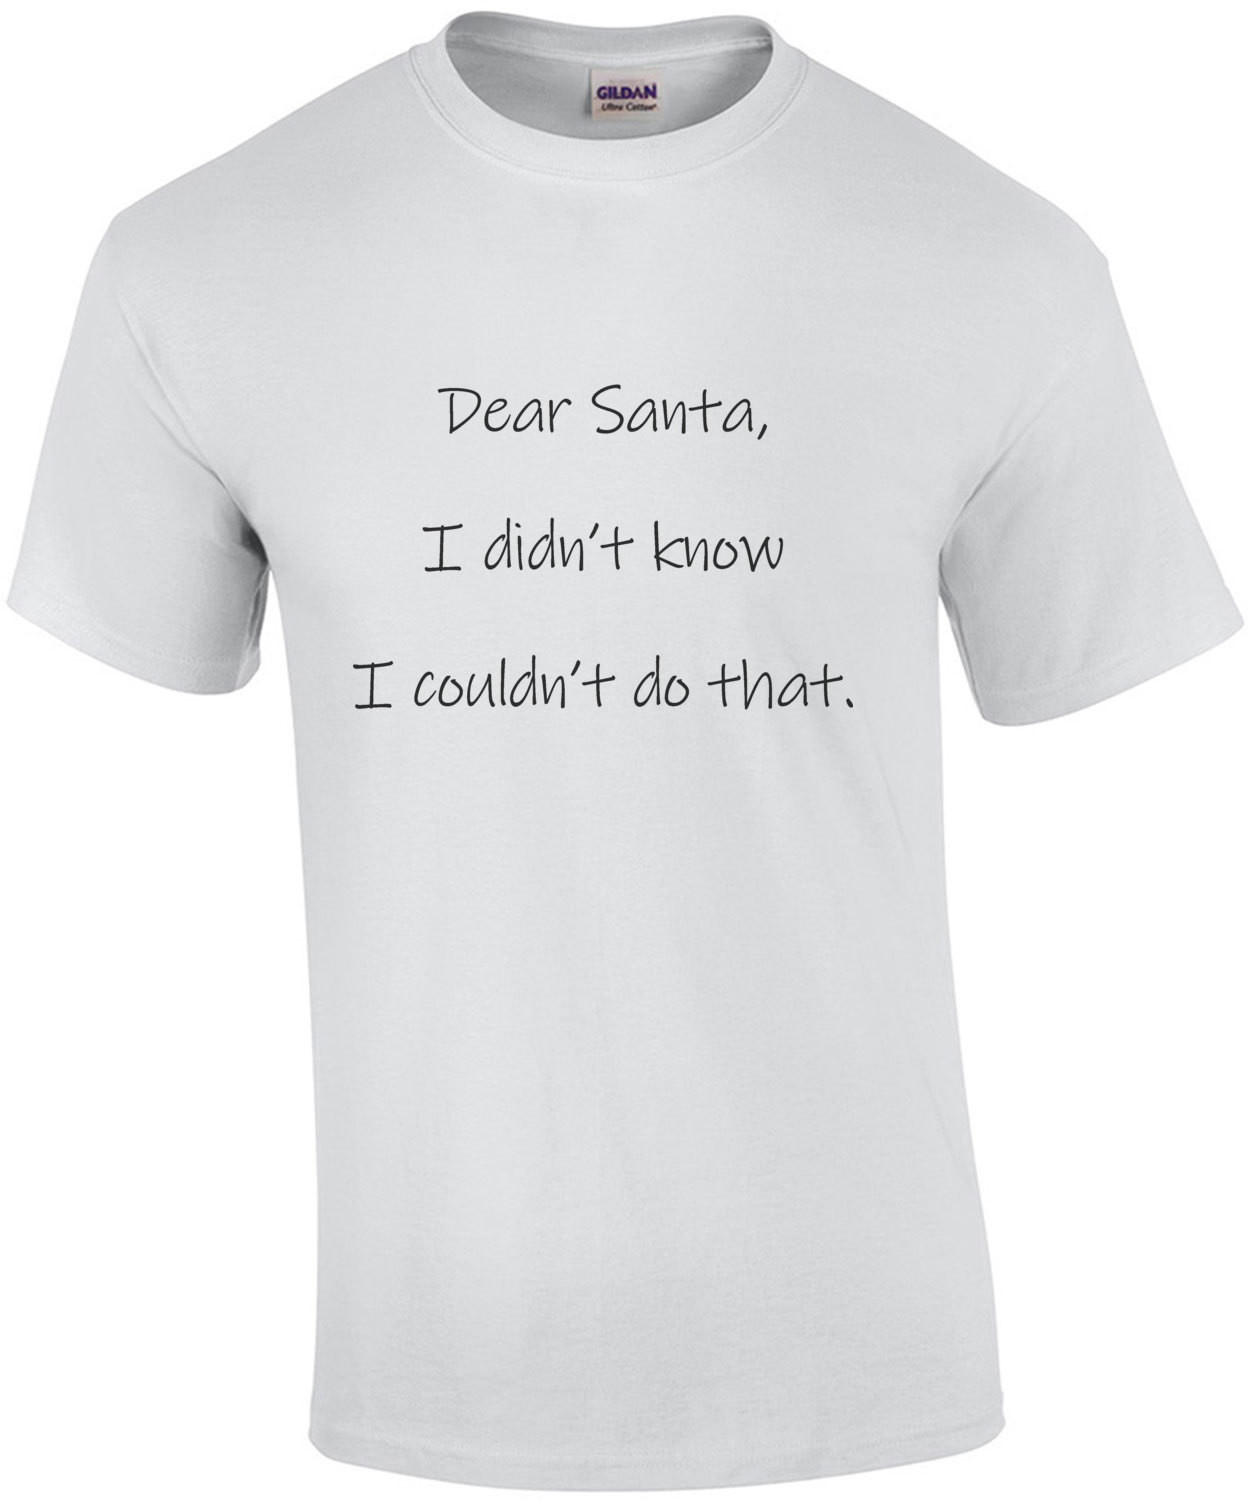 Dear Santa, I didn't know I couldn't do that. Christmas T-Shirt